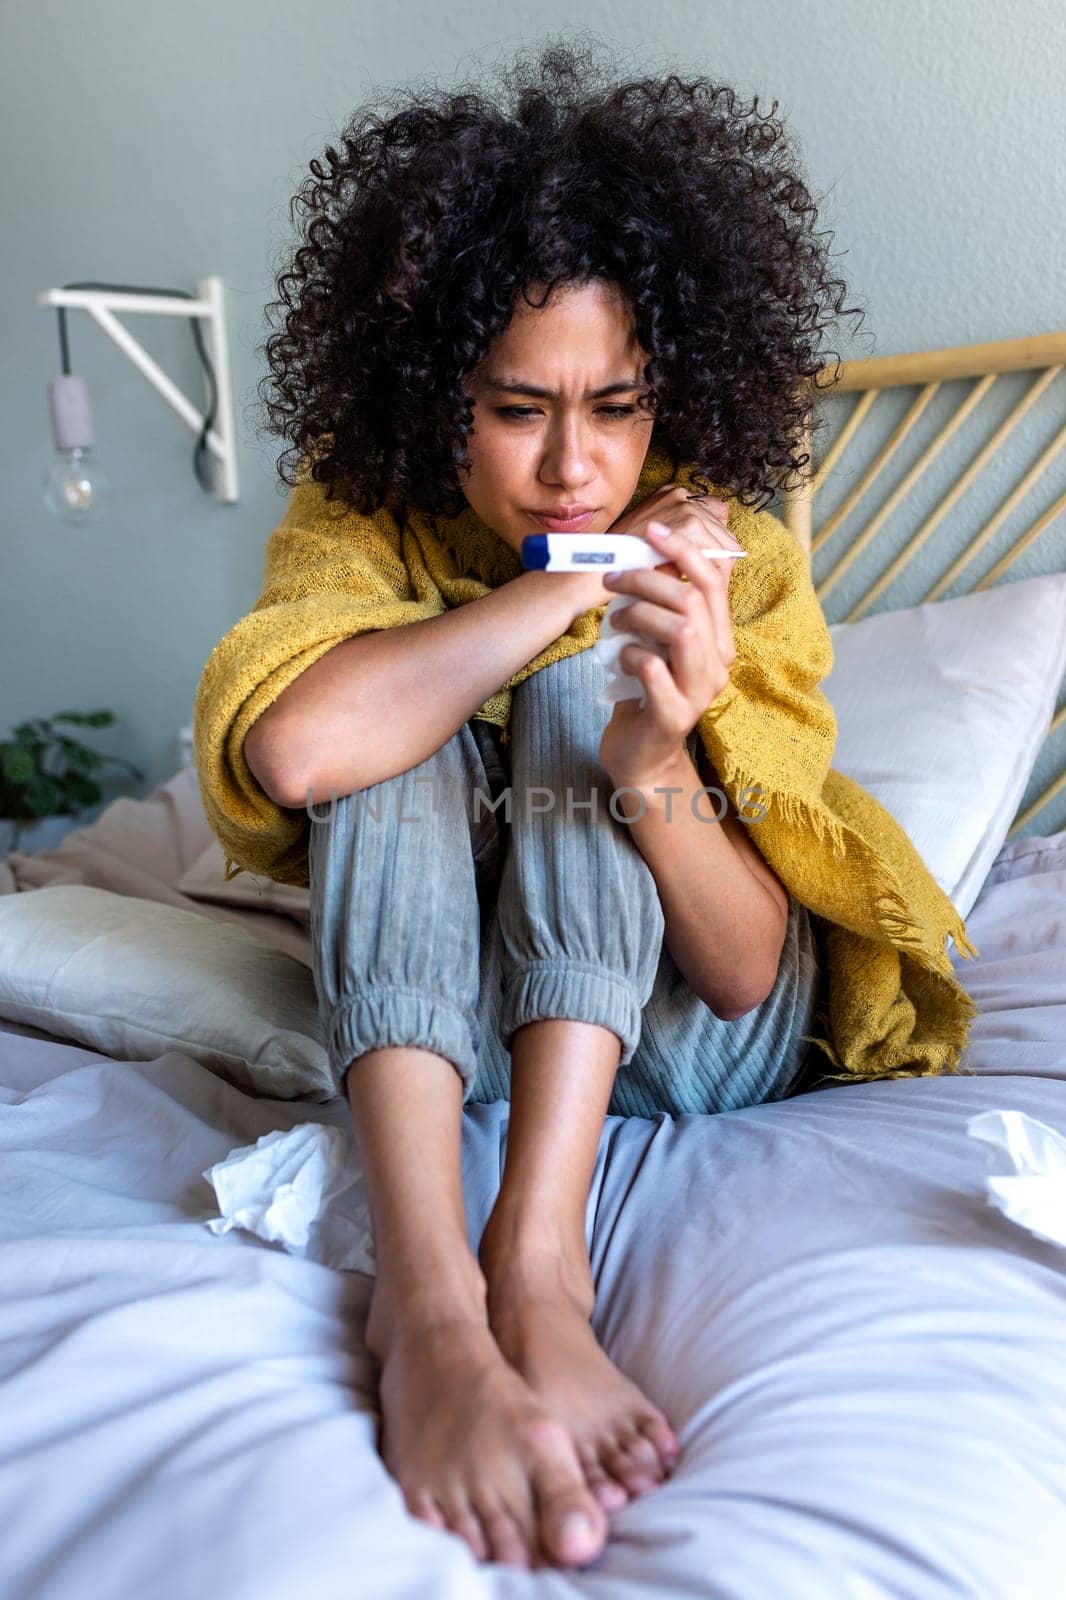 Multiracial woman with curly hair having the flu checking temperature with digital thermometer. Vertical image. by Hoverstock